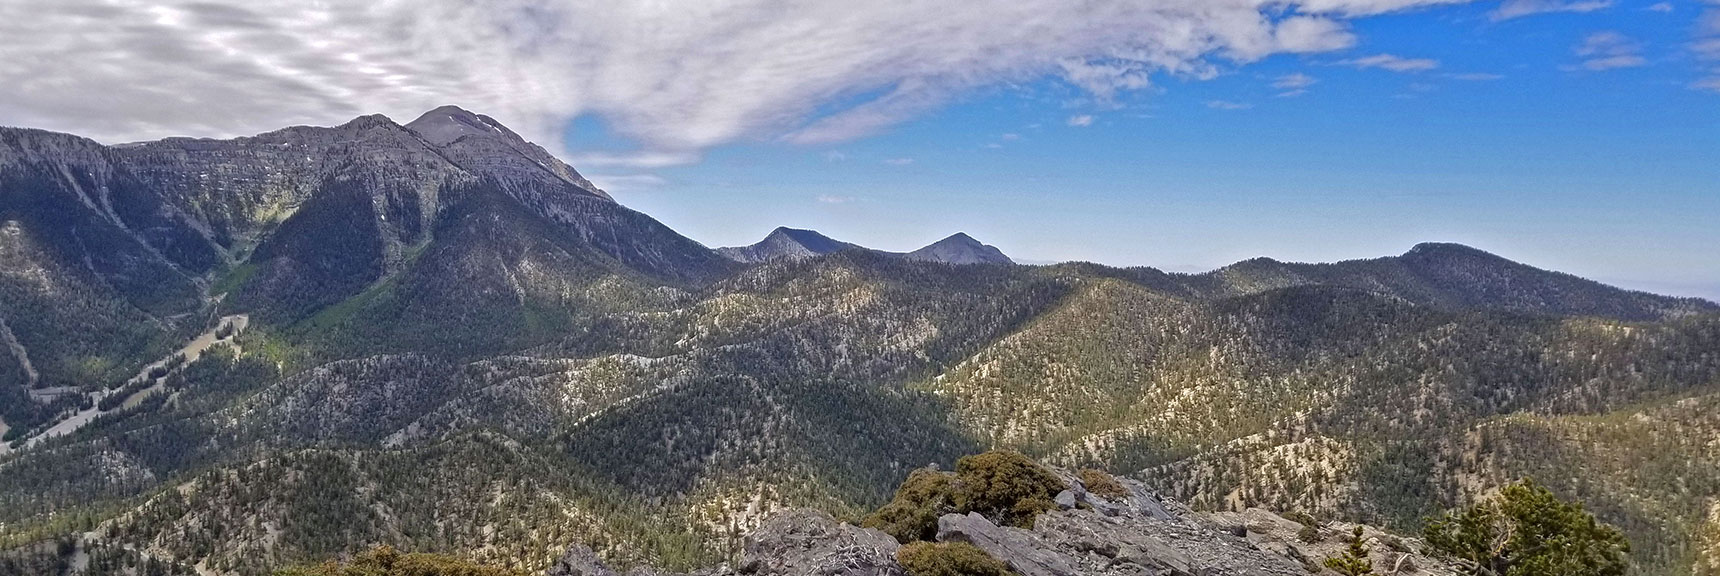 View Out the Upper End of Lee Canyon to the Right of Charleston Peak. | The Sisters South | Lee Canyon | Mt Charleston Wilderness | Spring Mountains, Nevada